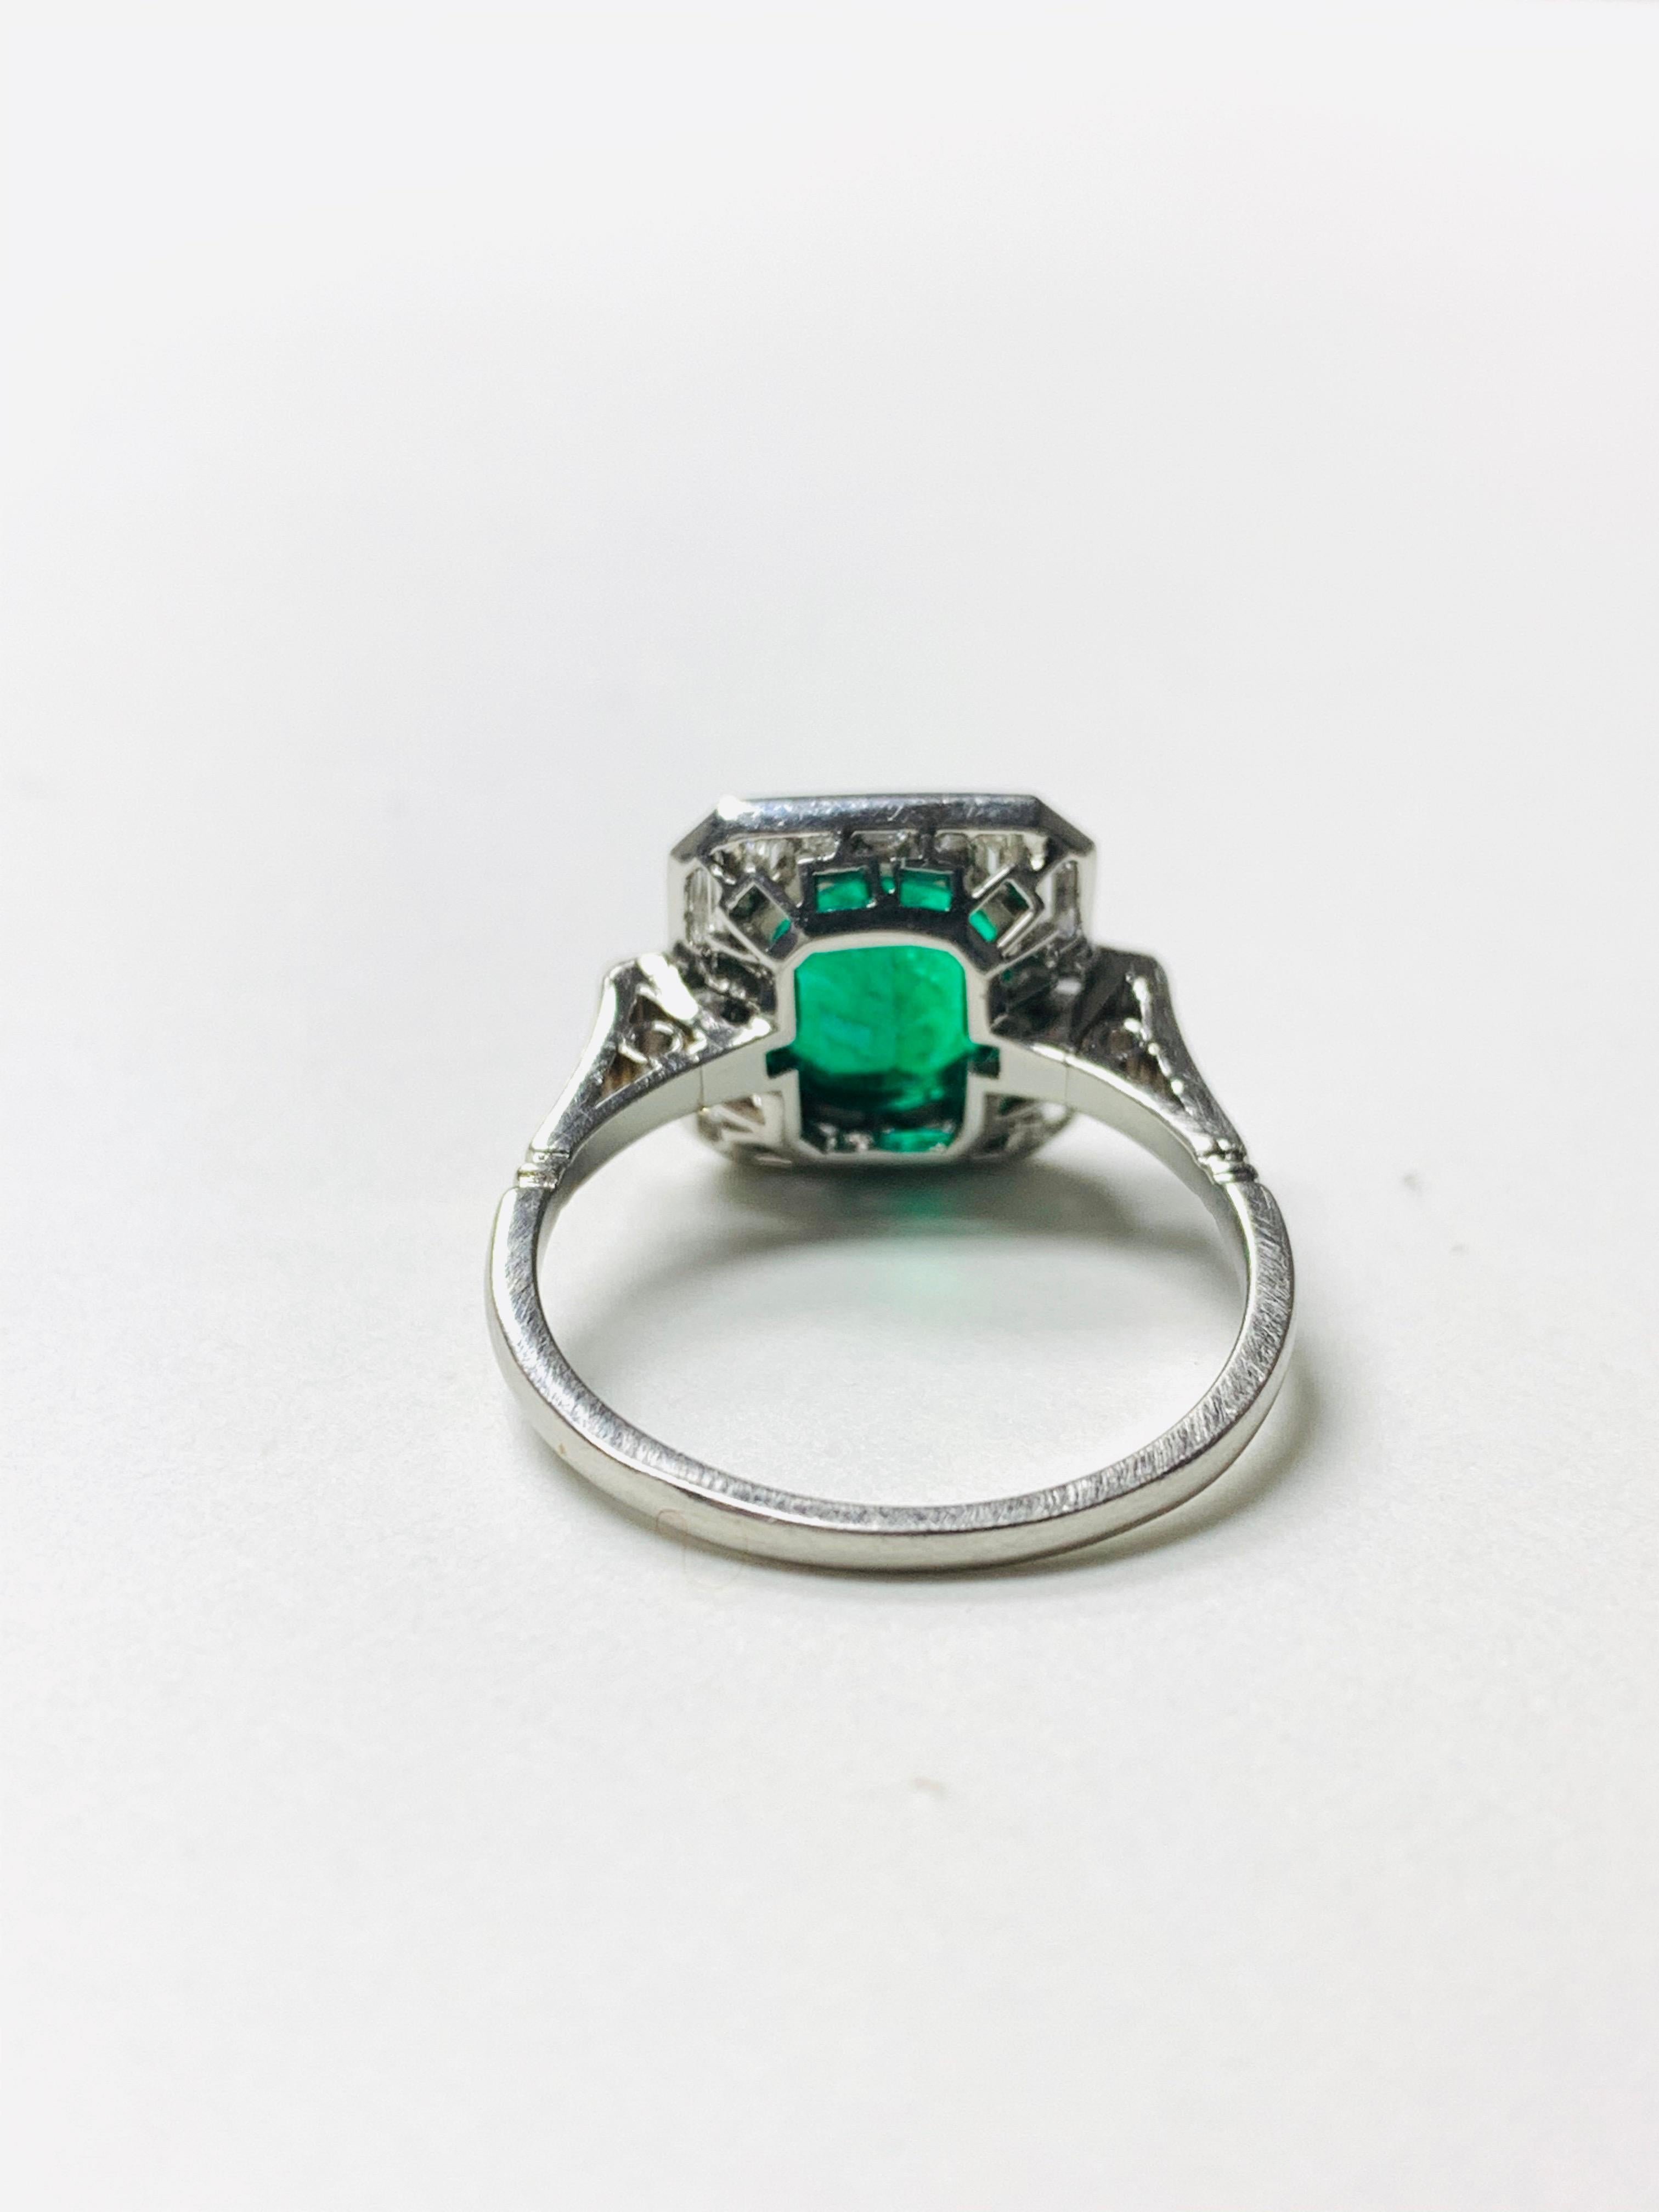 Oval Cut Emerald and Baguette Diamond Engagement Ring in Platinum